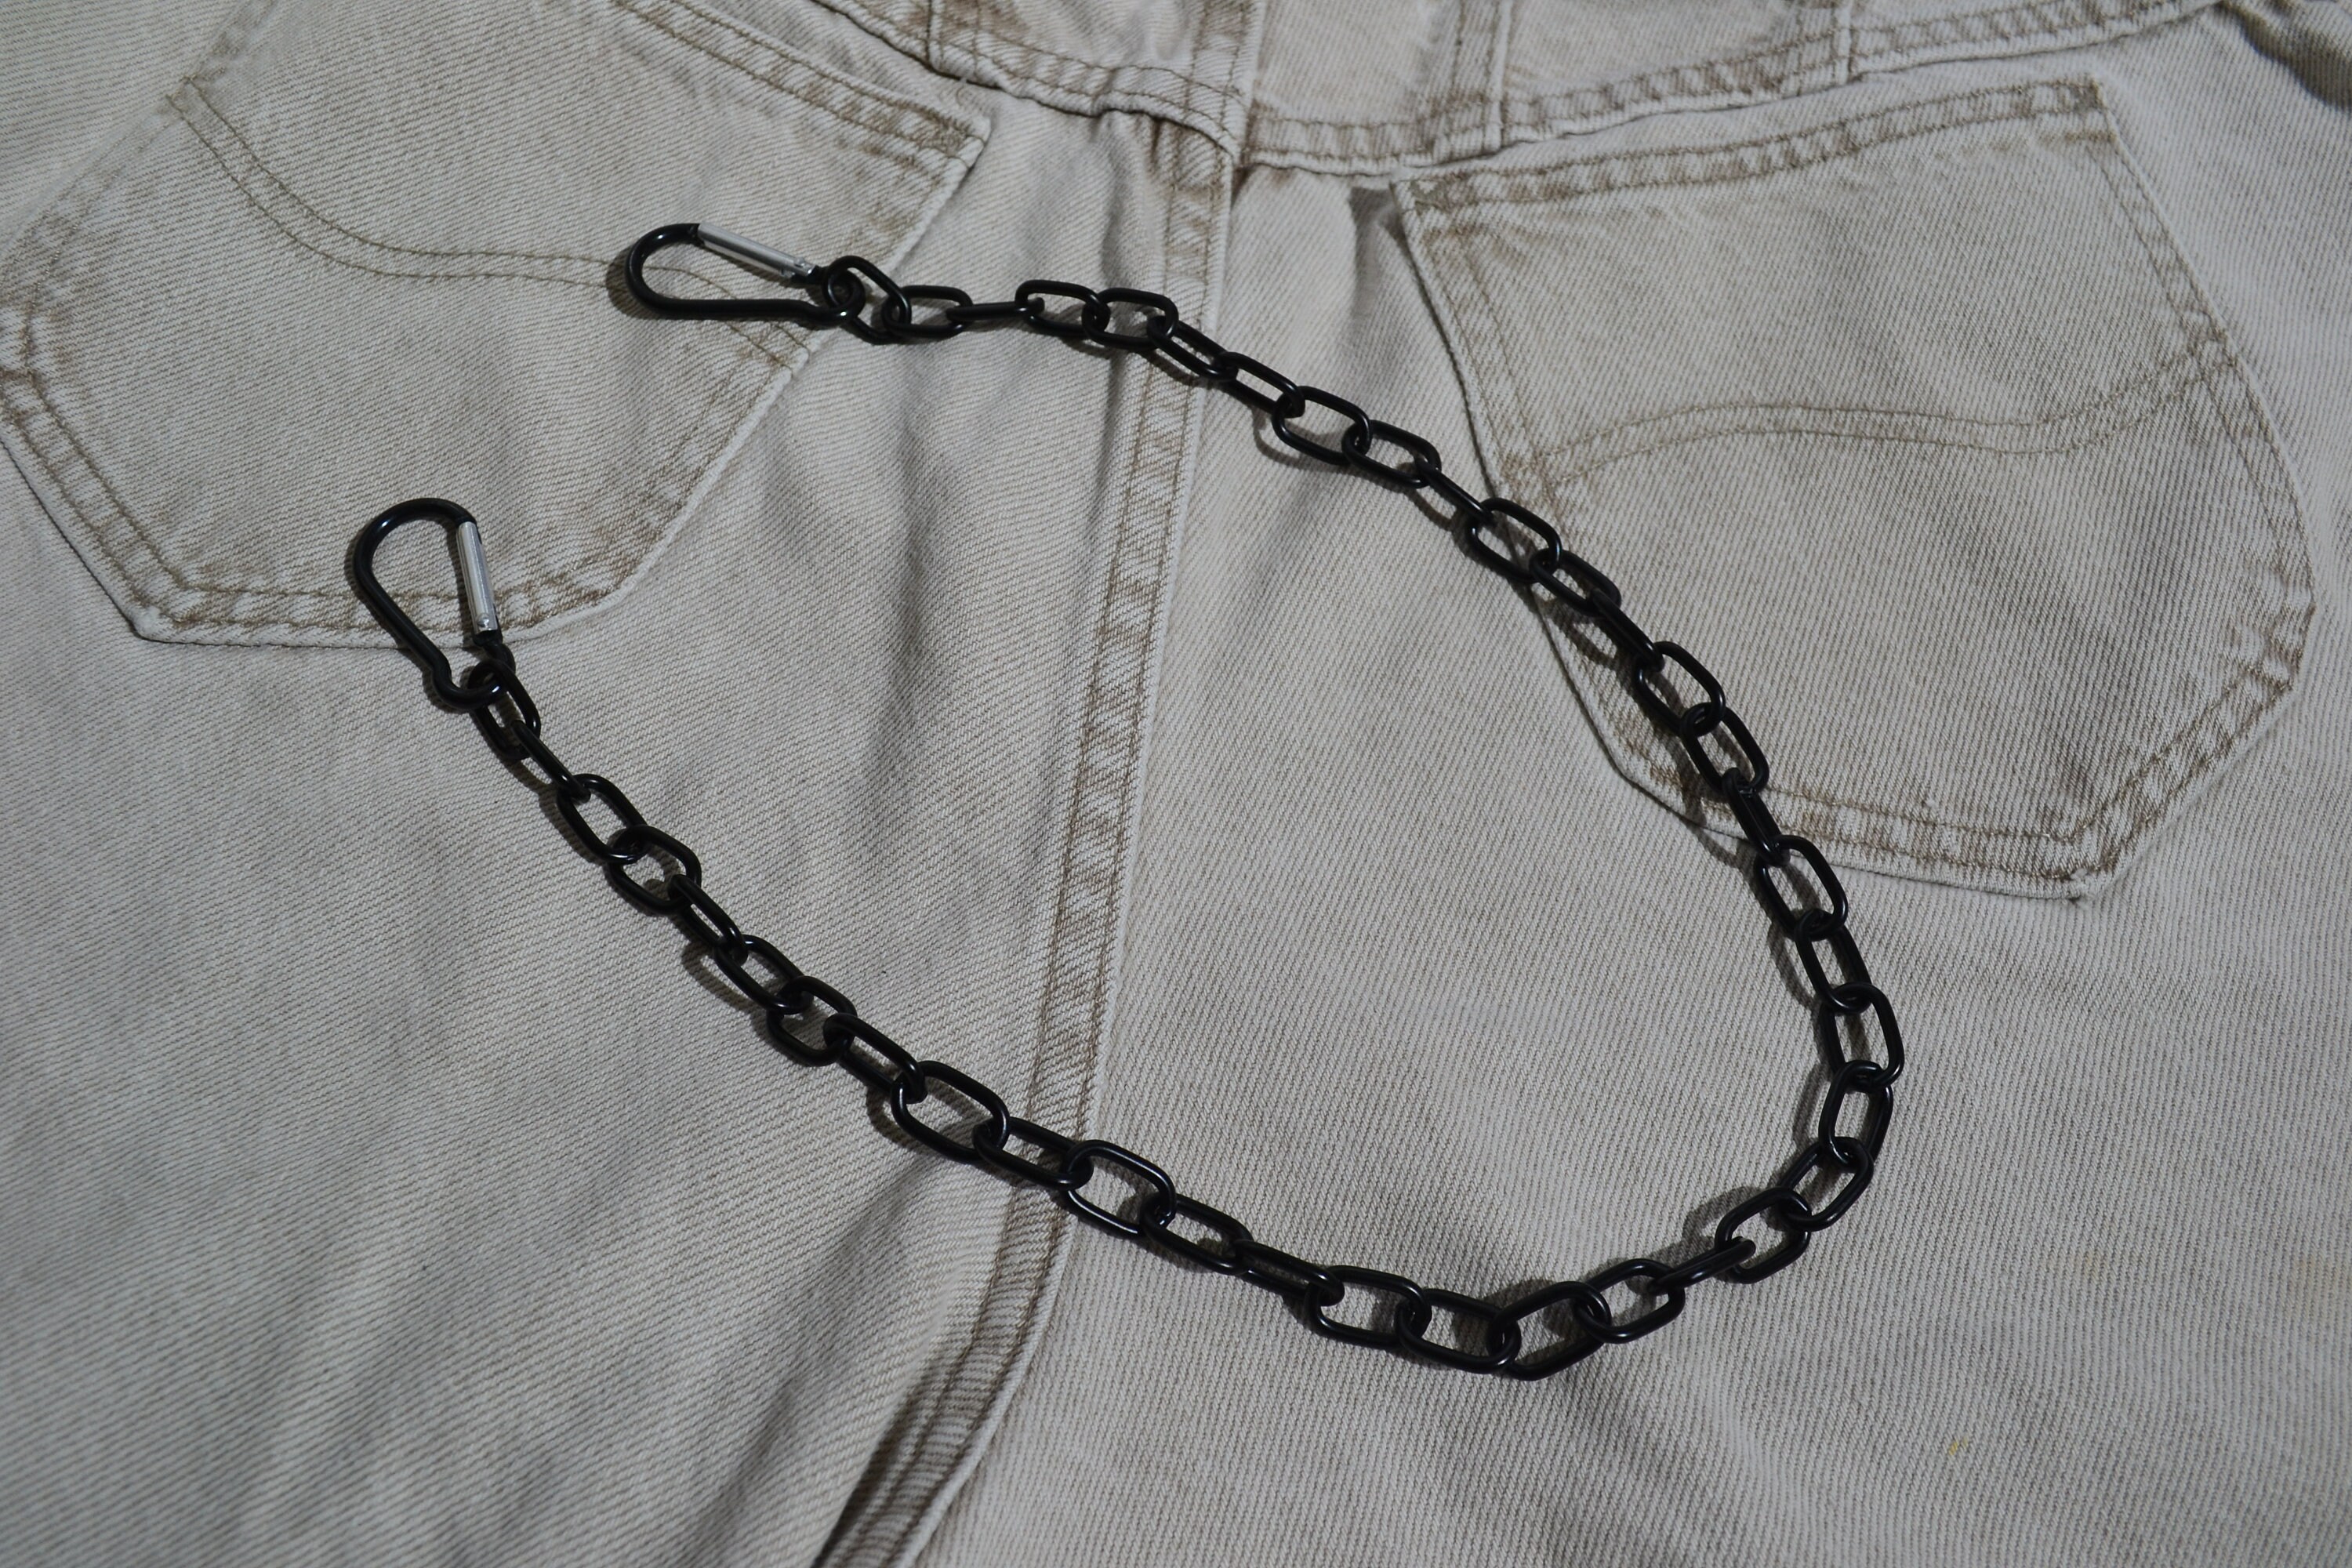 Thick Wallet chain, bulky, chunky, heavy Belt chain, 90's Trouser chain,  Industrial, Alternative, Grunge, Goth, Punk, Rock, Grungy